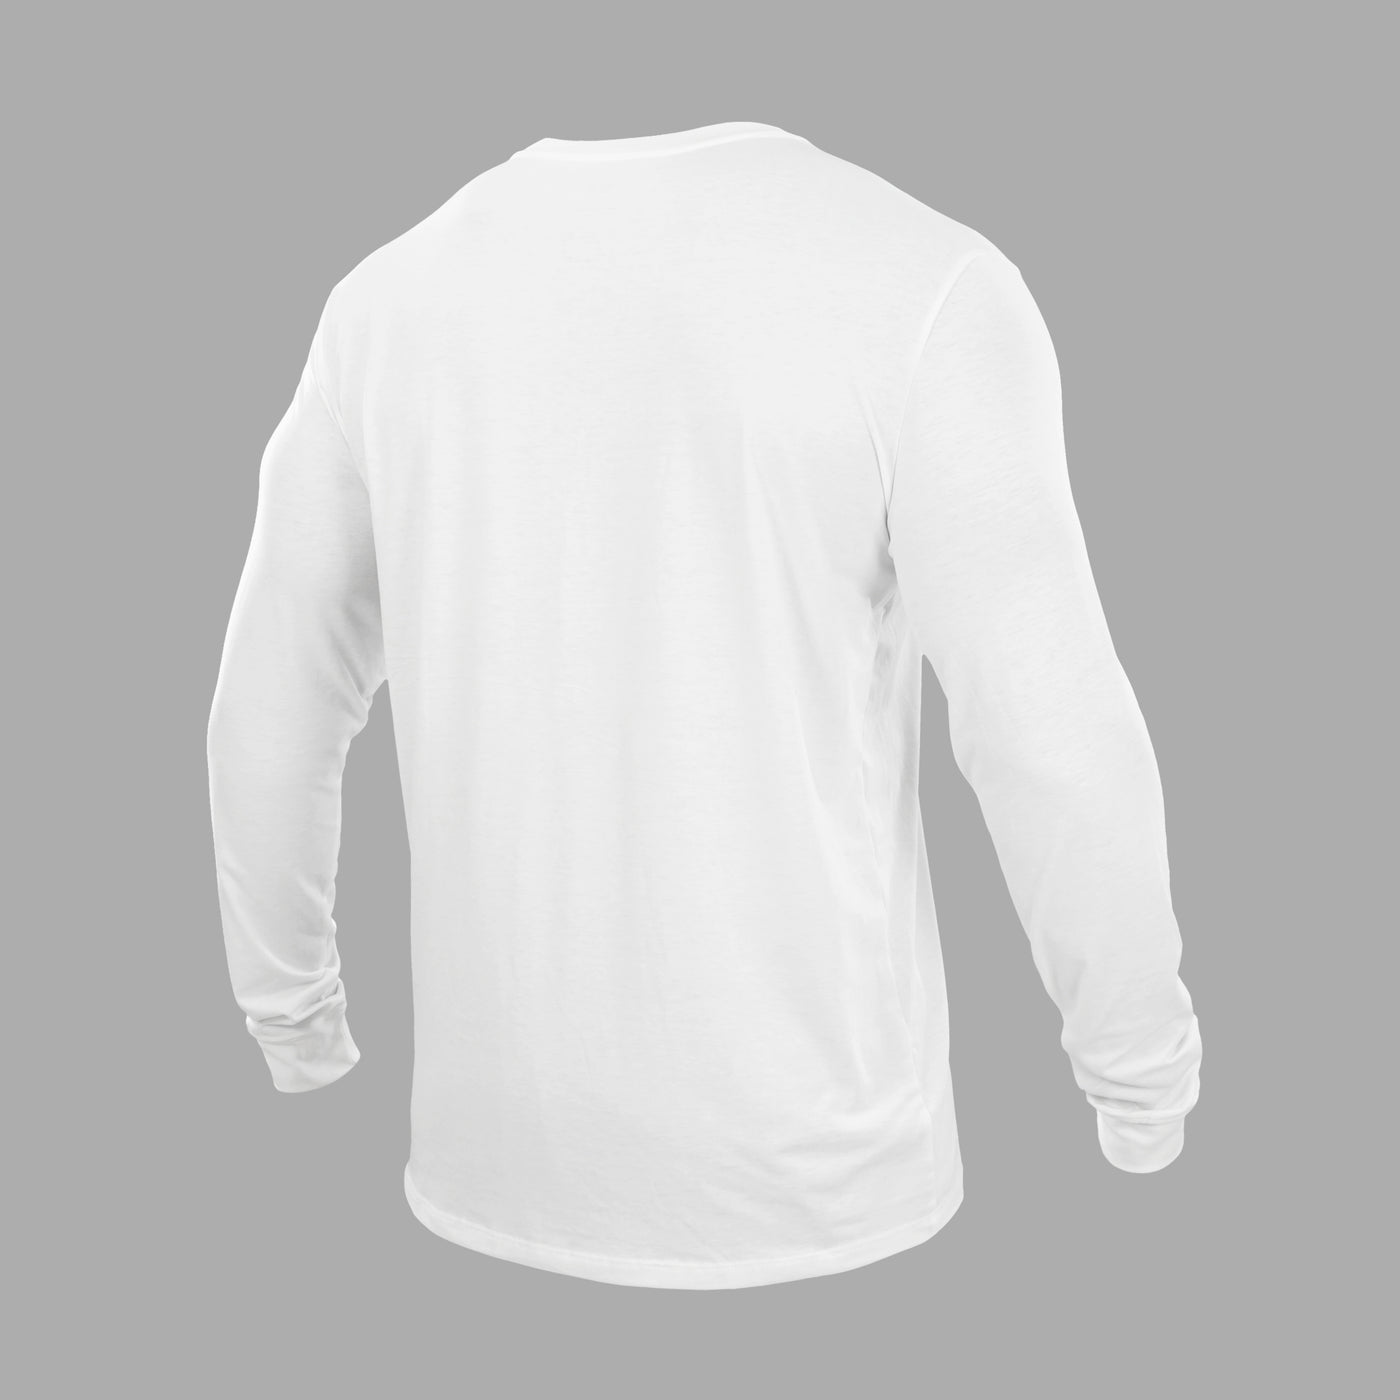 Basic White Dry Fit Cotton/Poly Long Sleeve Tee